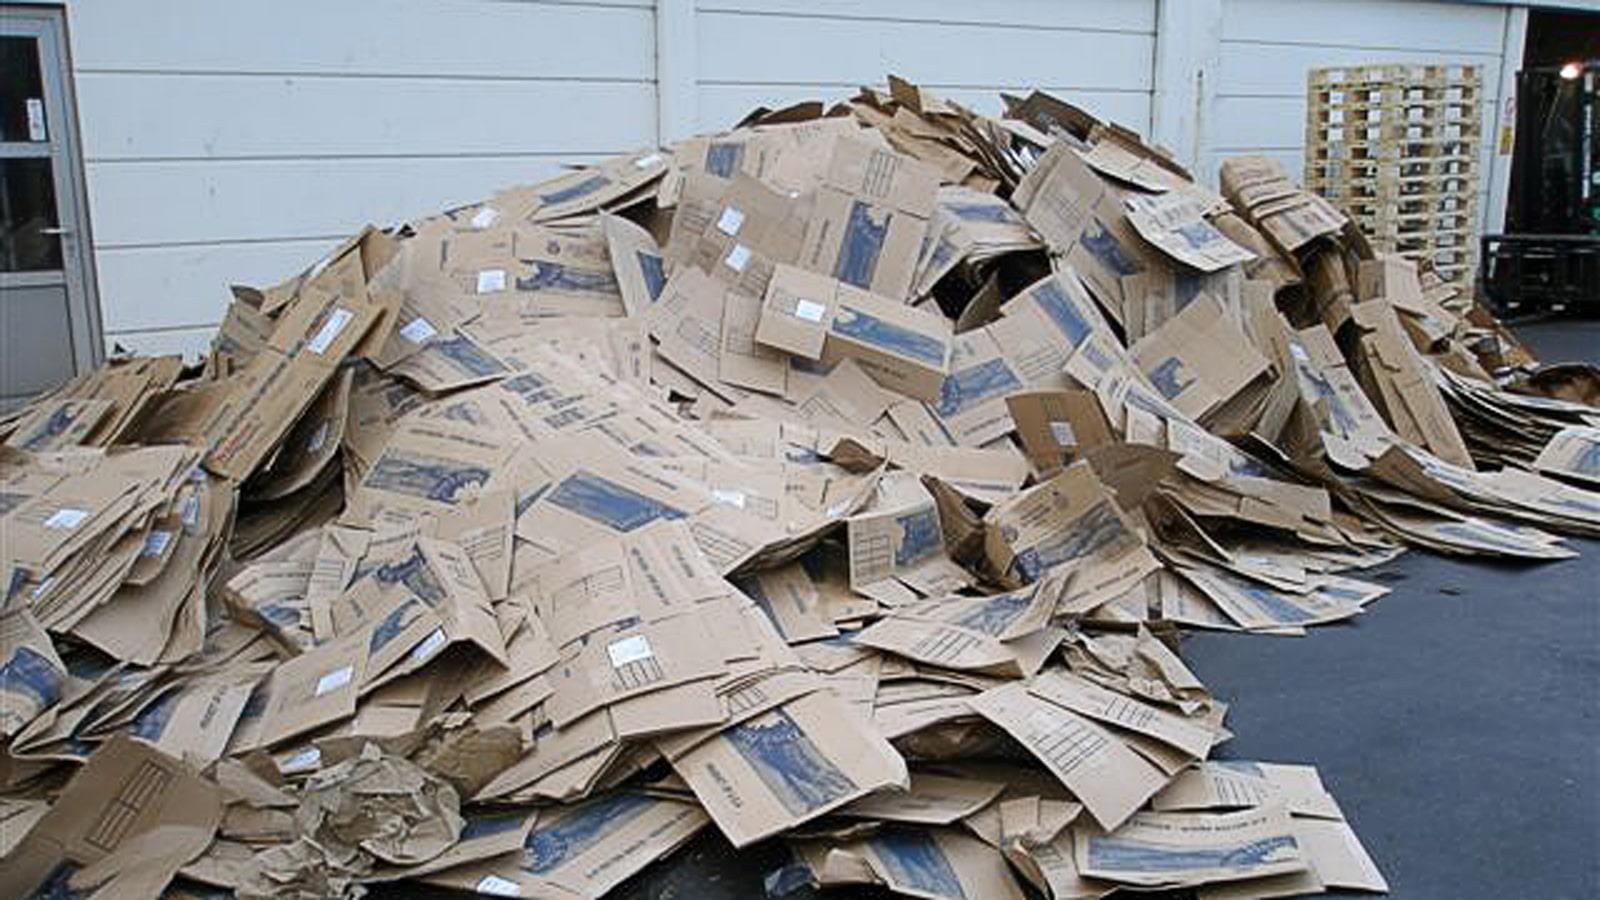 Heap of cardboard waste outside on the ground